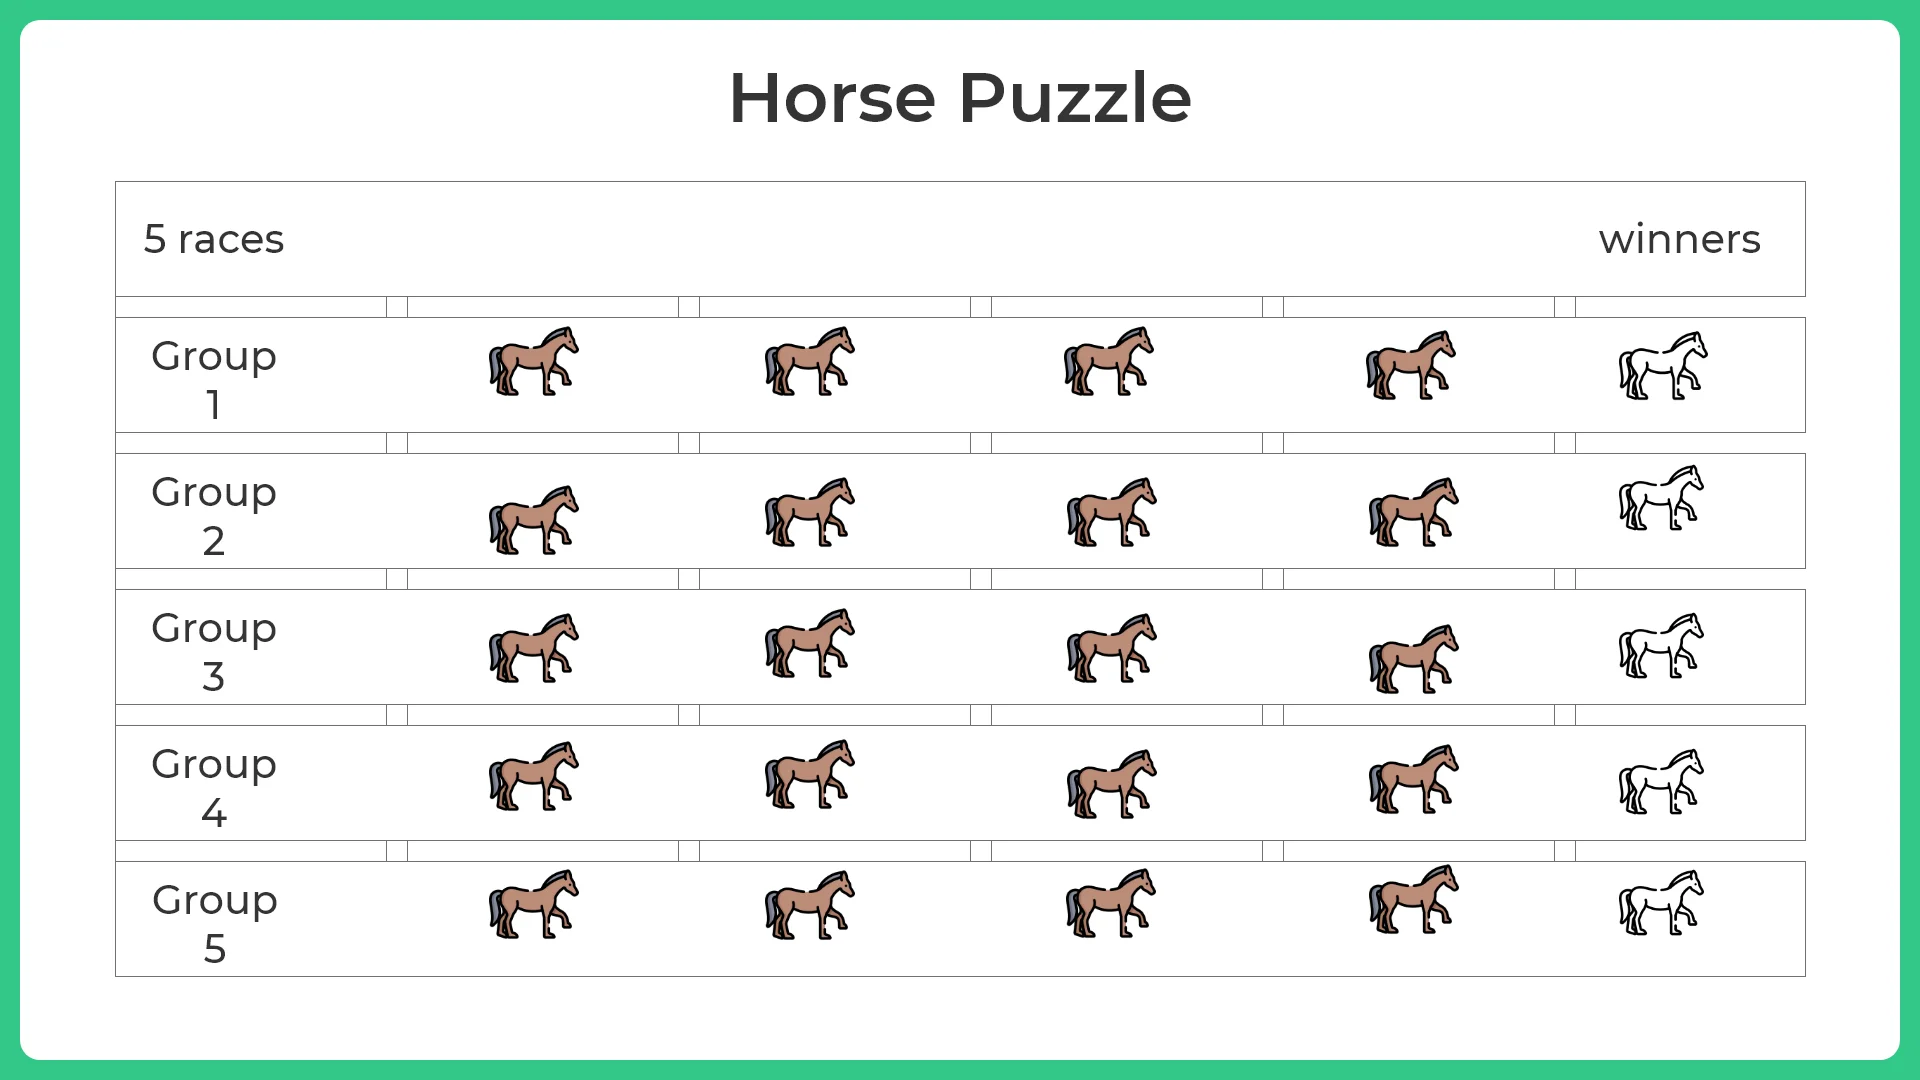 There are 25 horses, among which you have